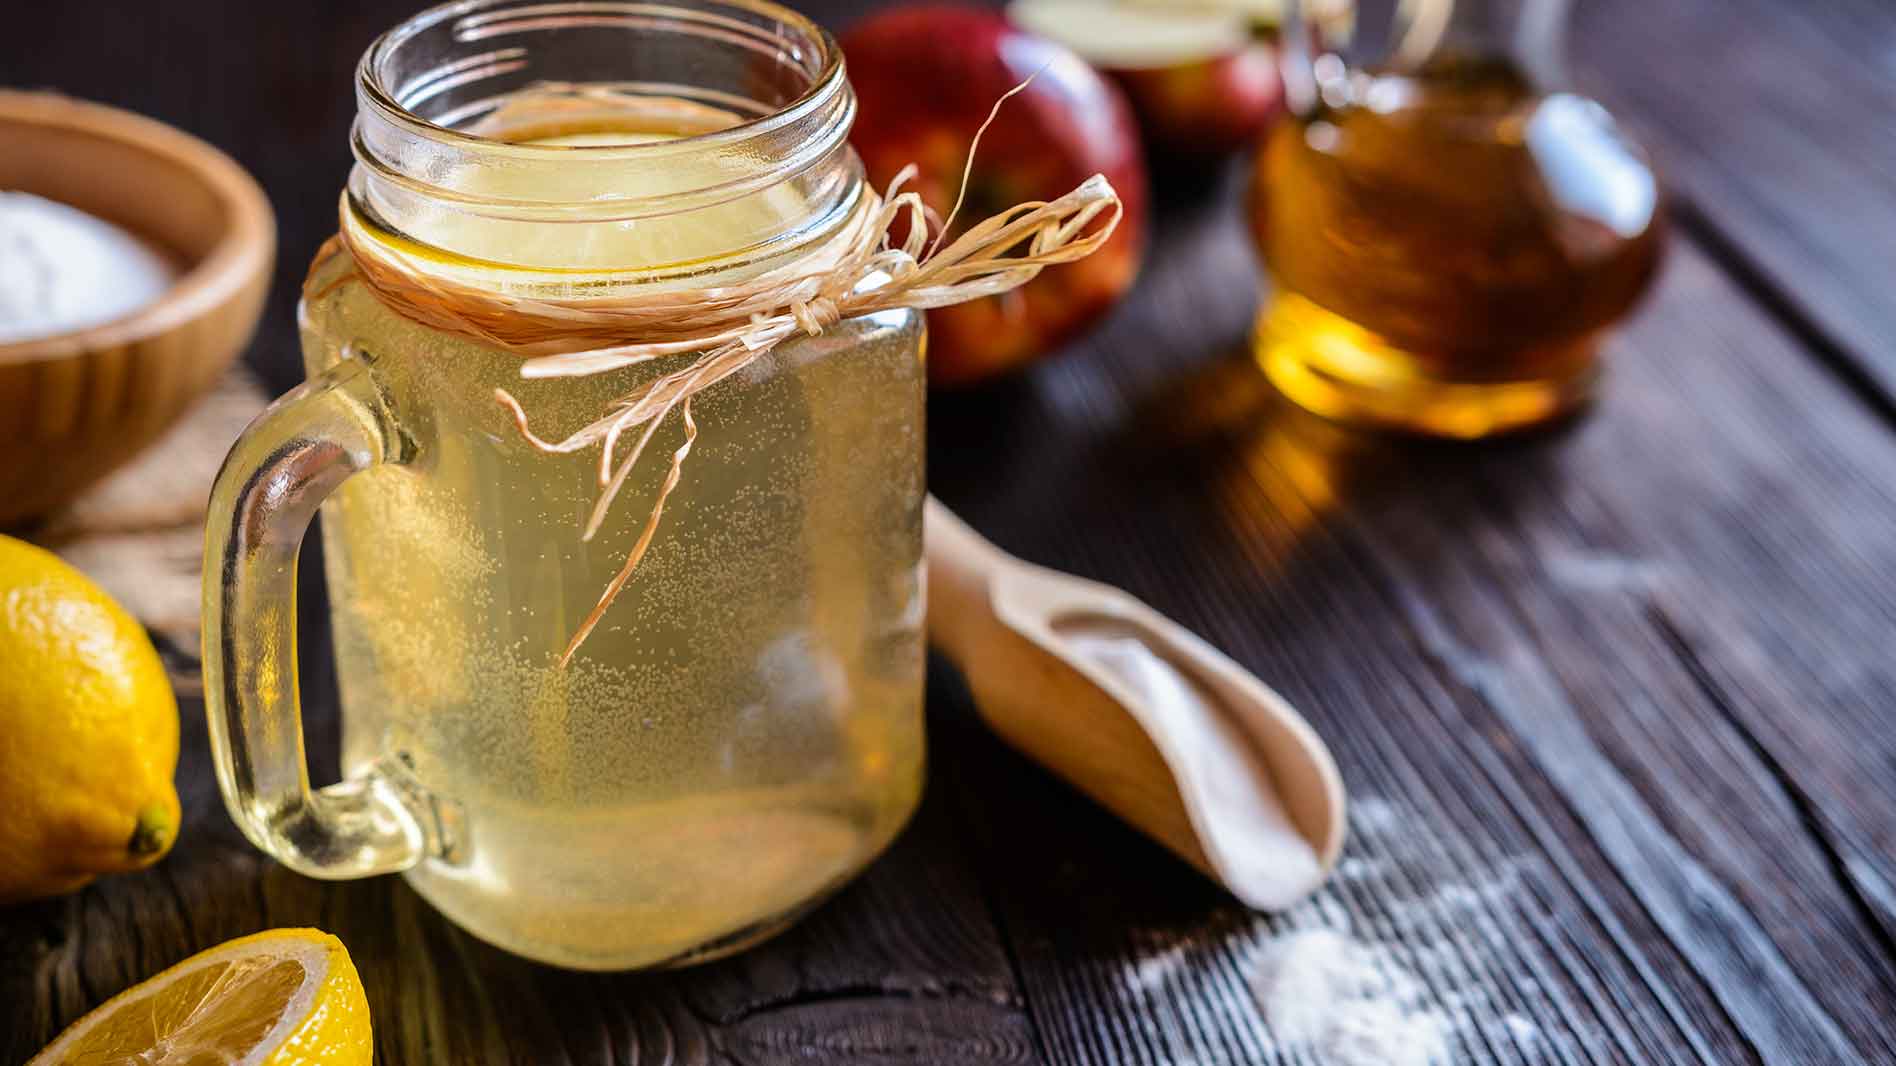 What does apple cider vinegar do: the latest food craze affecting your menu offering